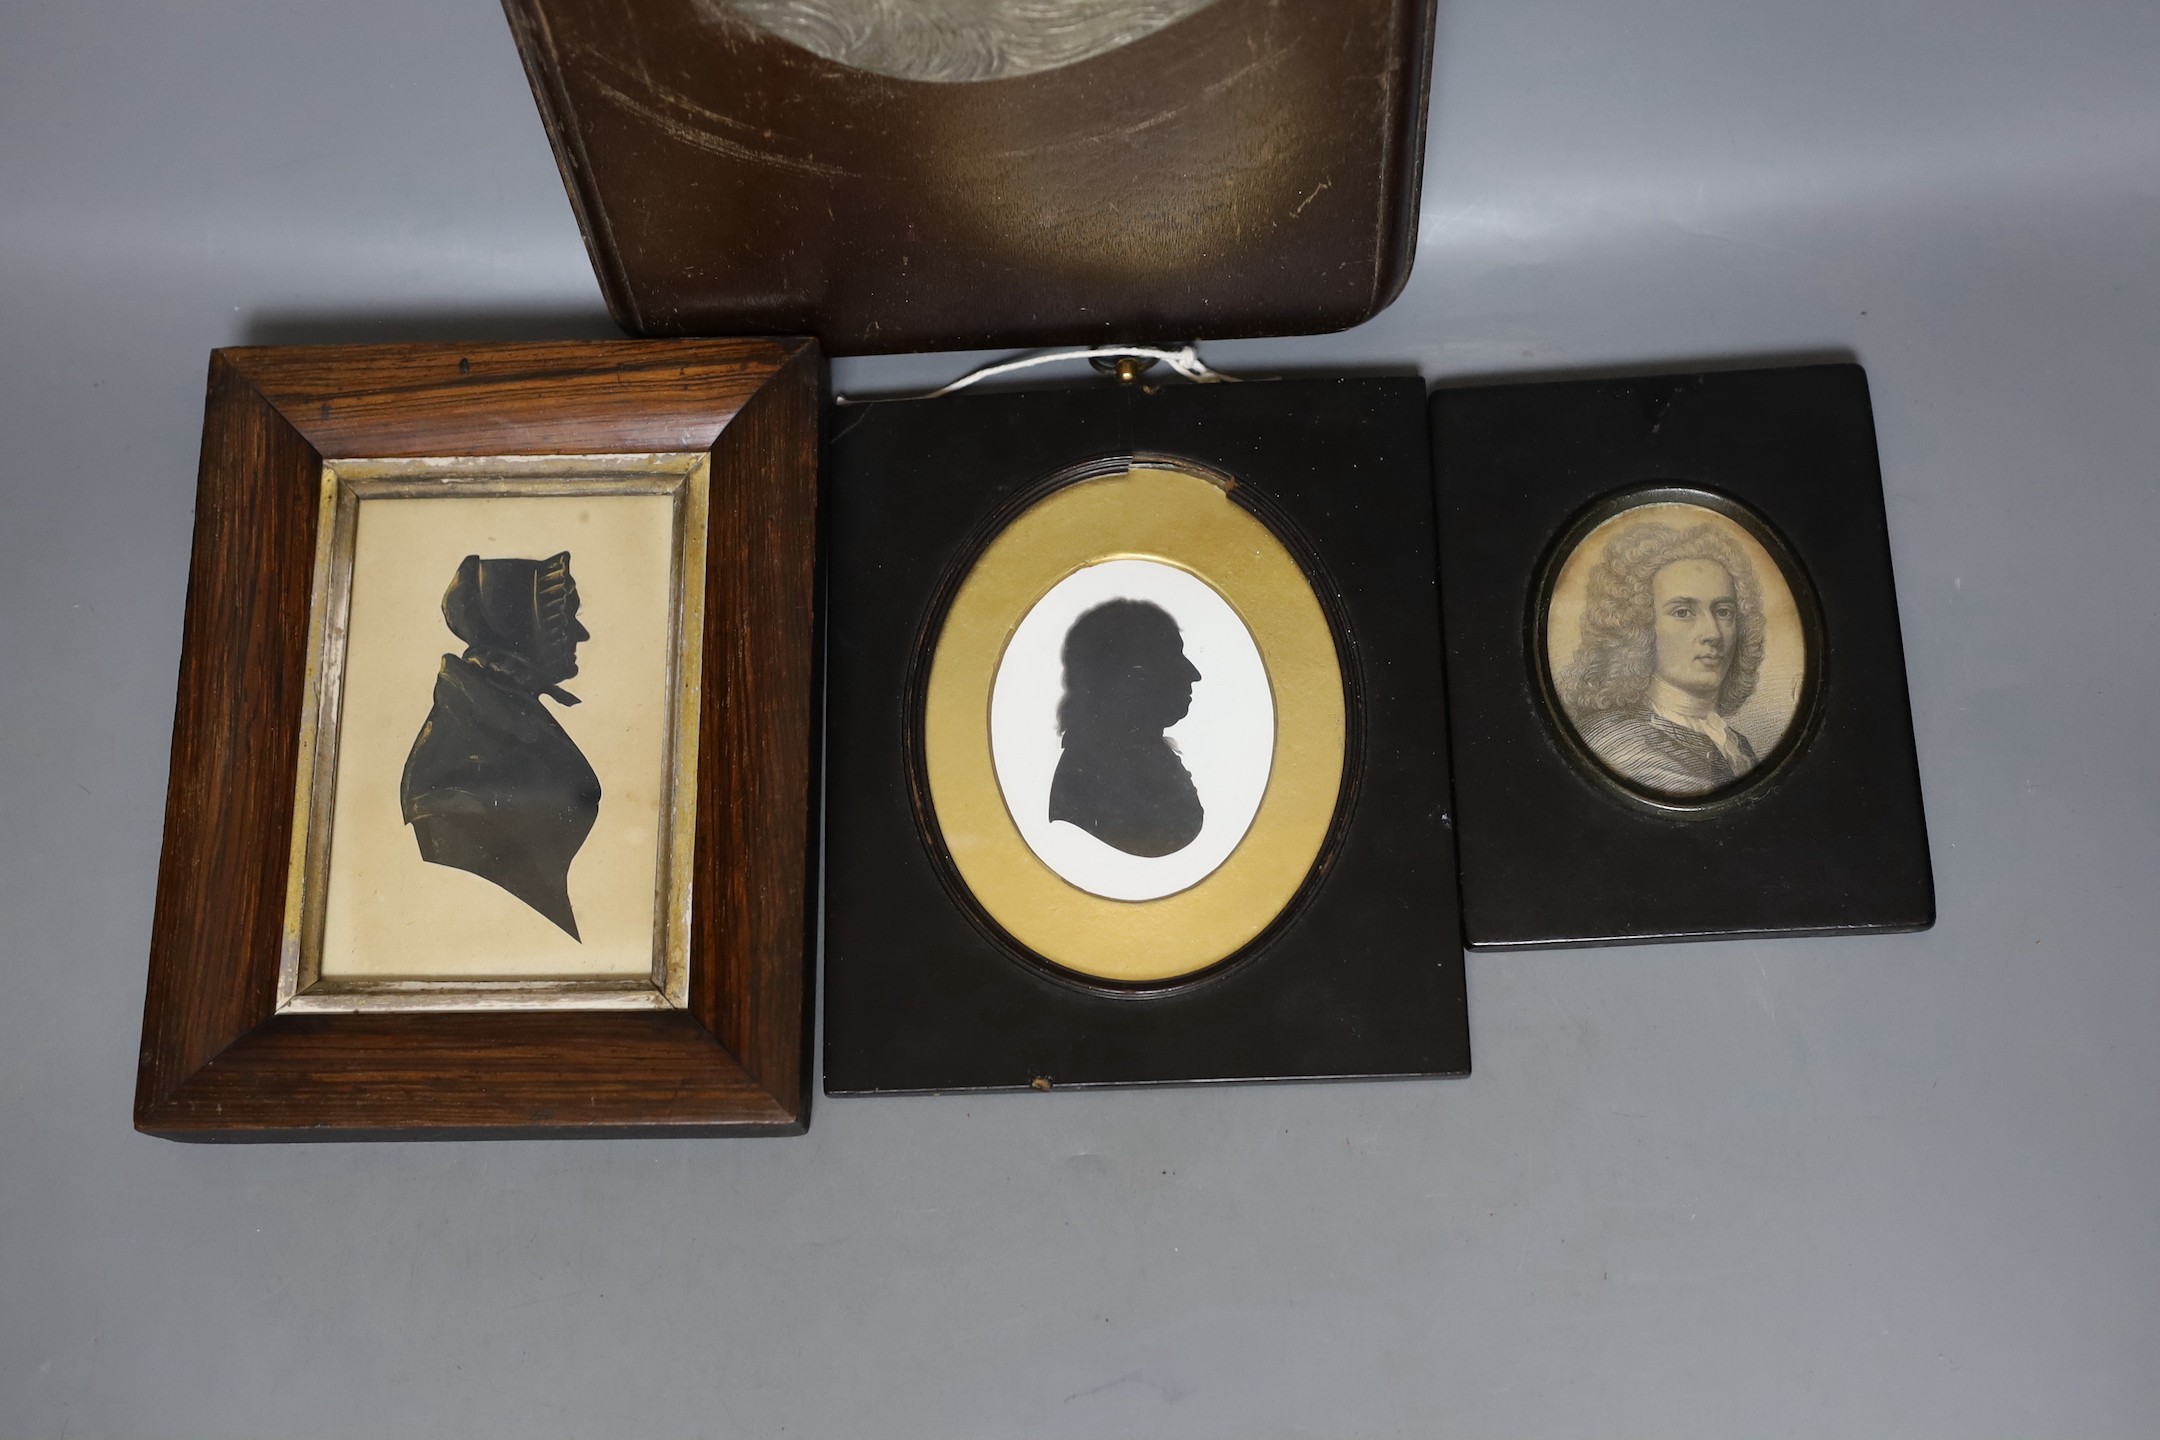 Two Victorian silhouette portraits, a printed monochrome bust, all framed together, with an early 20th century German relief of a borzoi, 33 x 19cm